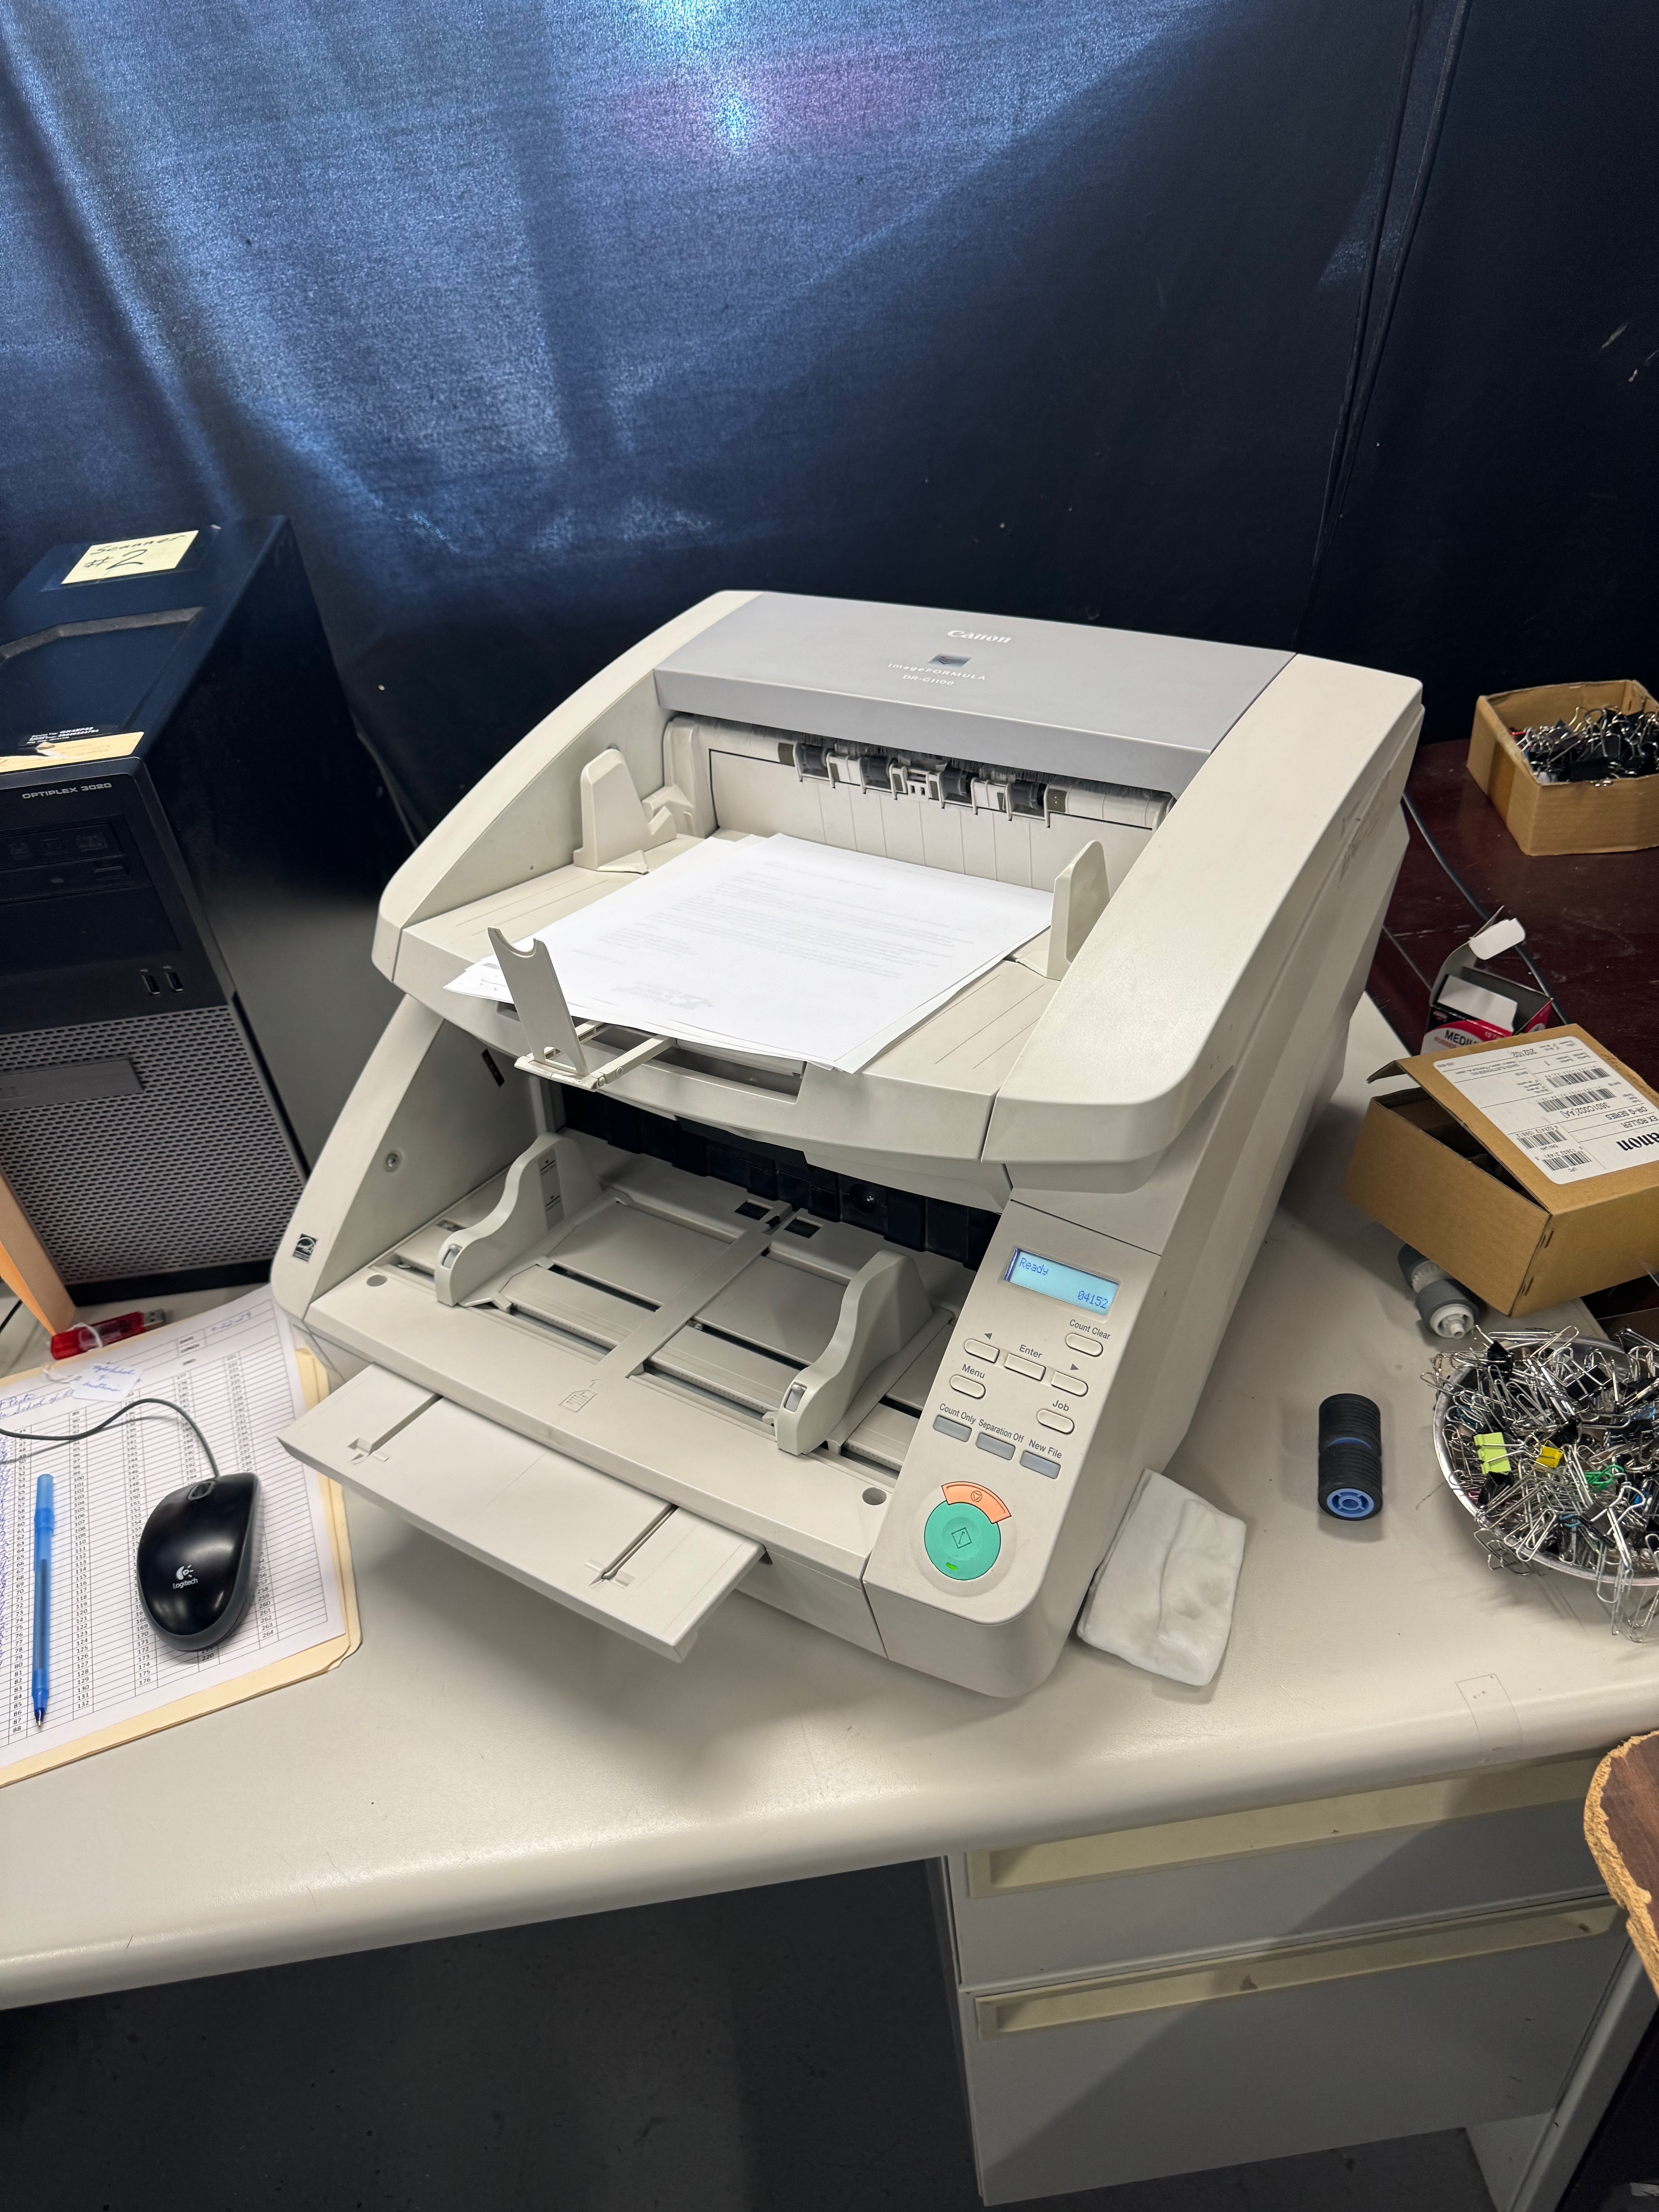 Canon DG-1100 scanning station used in file scanning. 